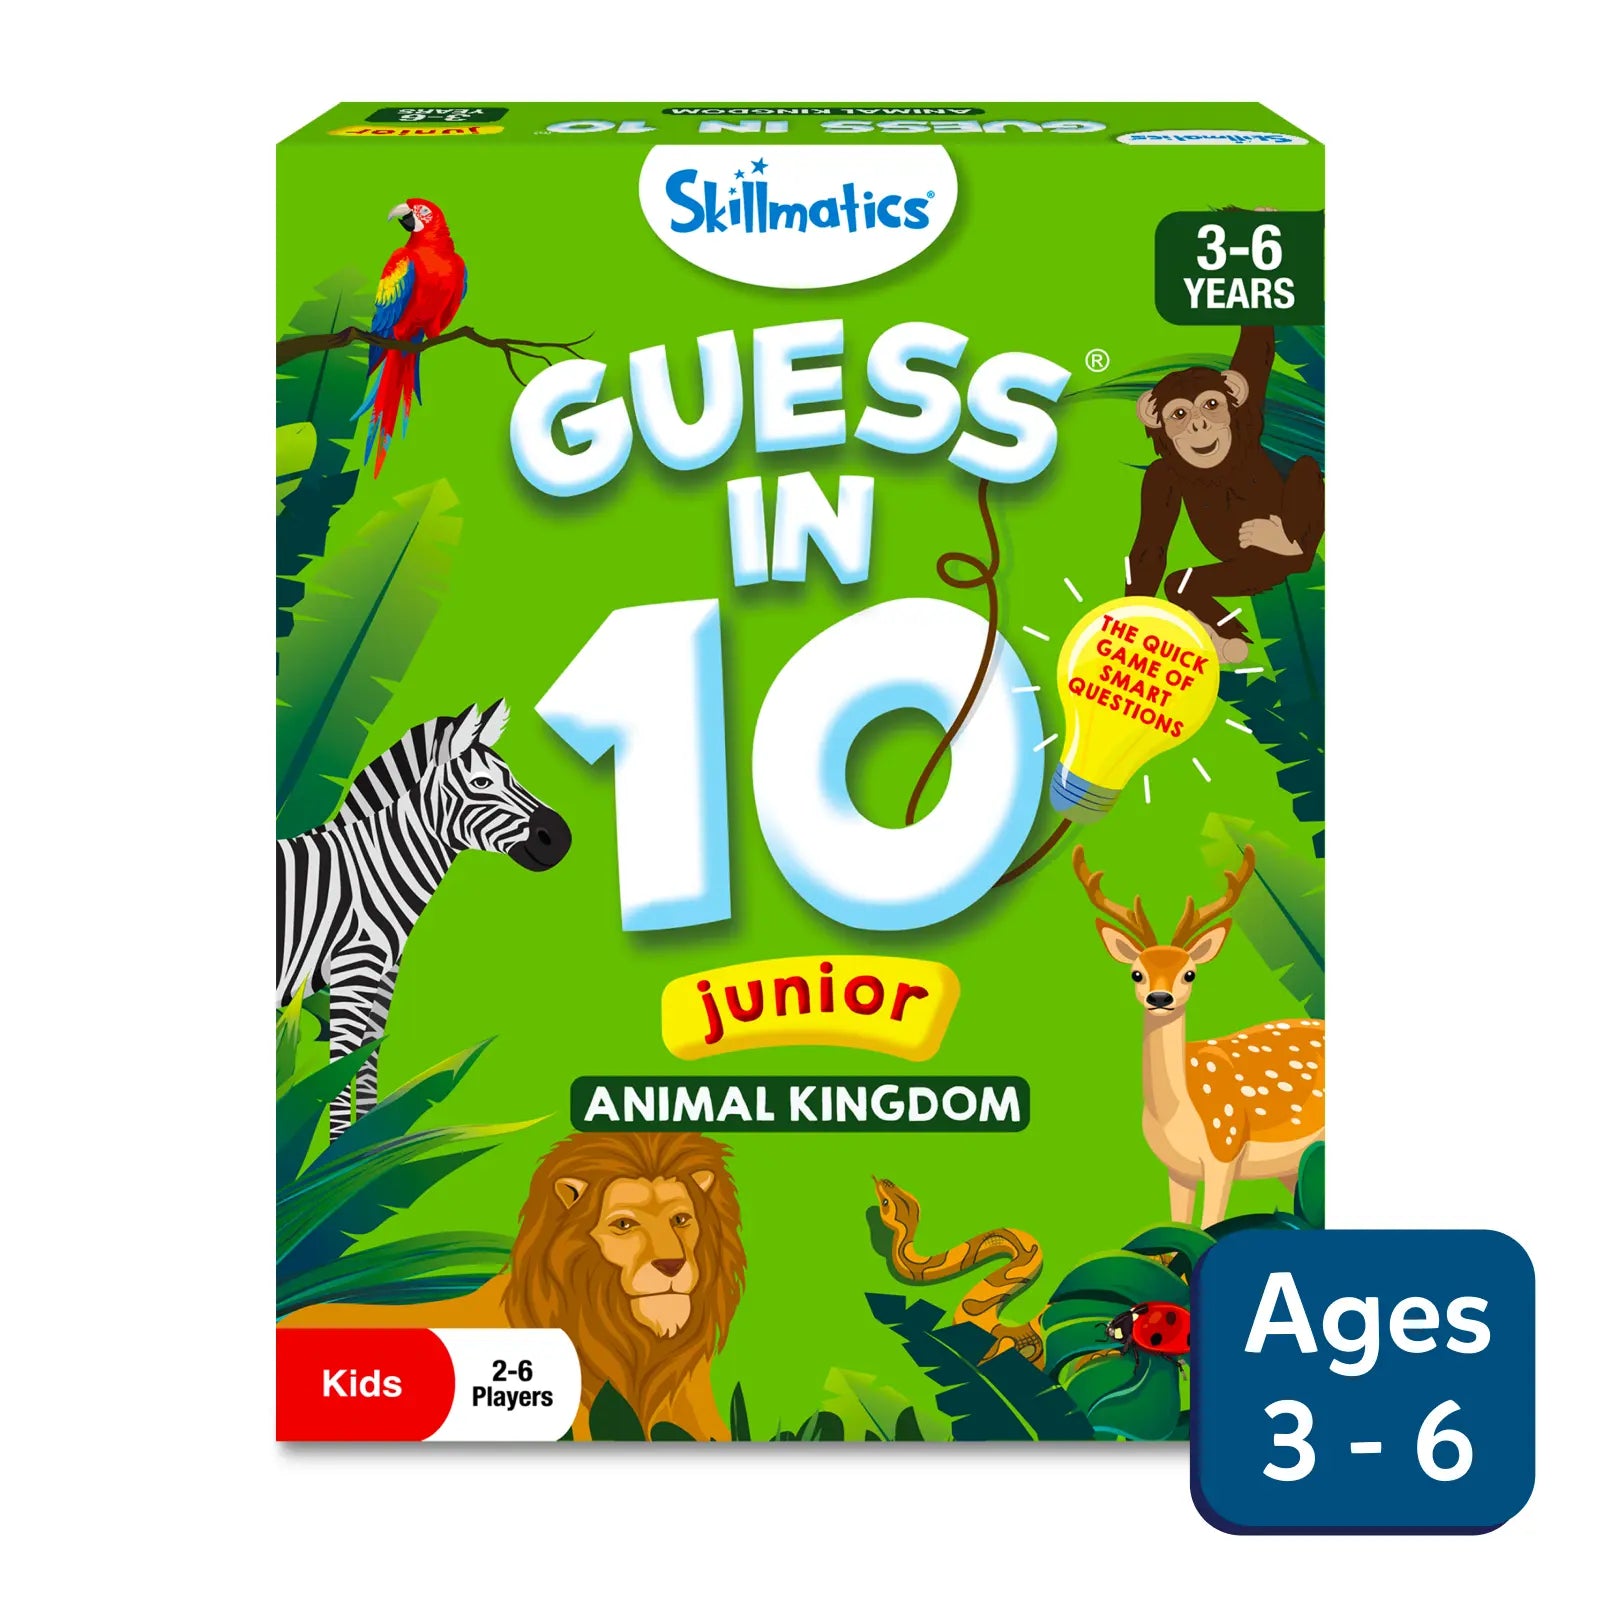 Guess in 10 Junior: Animal Kingdom | Trivia card game (ages 3-6)